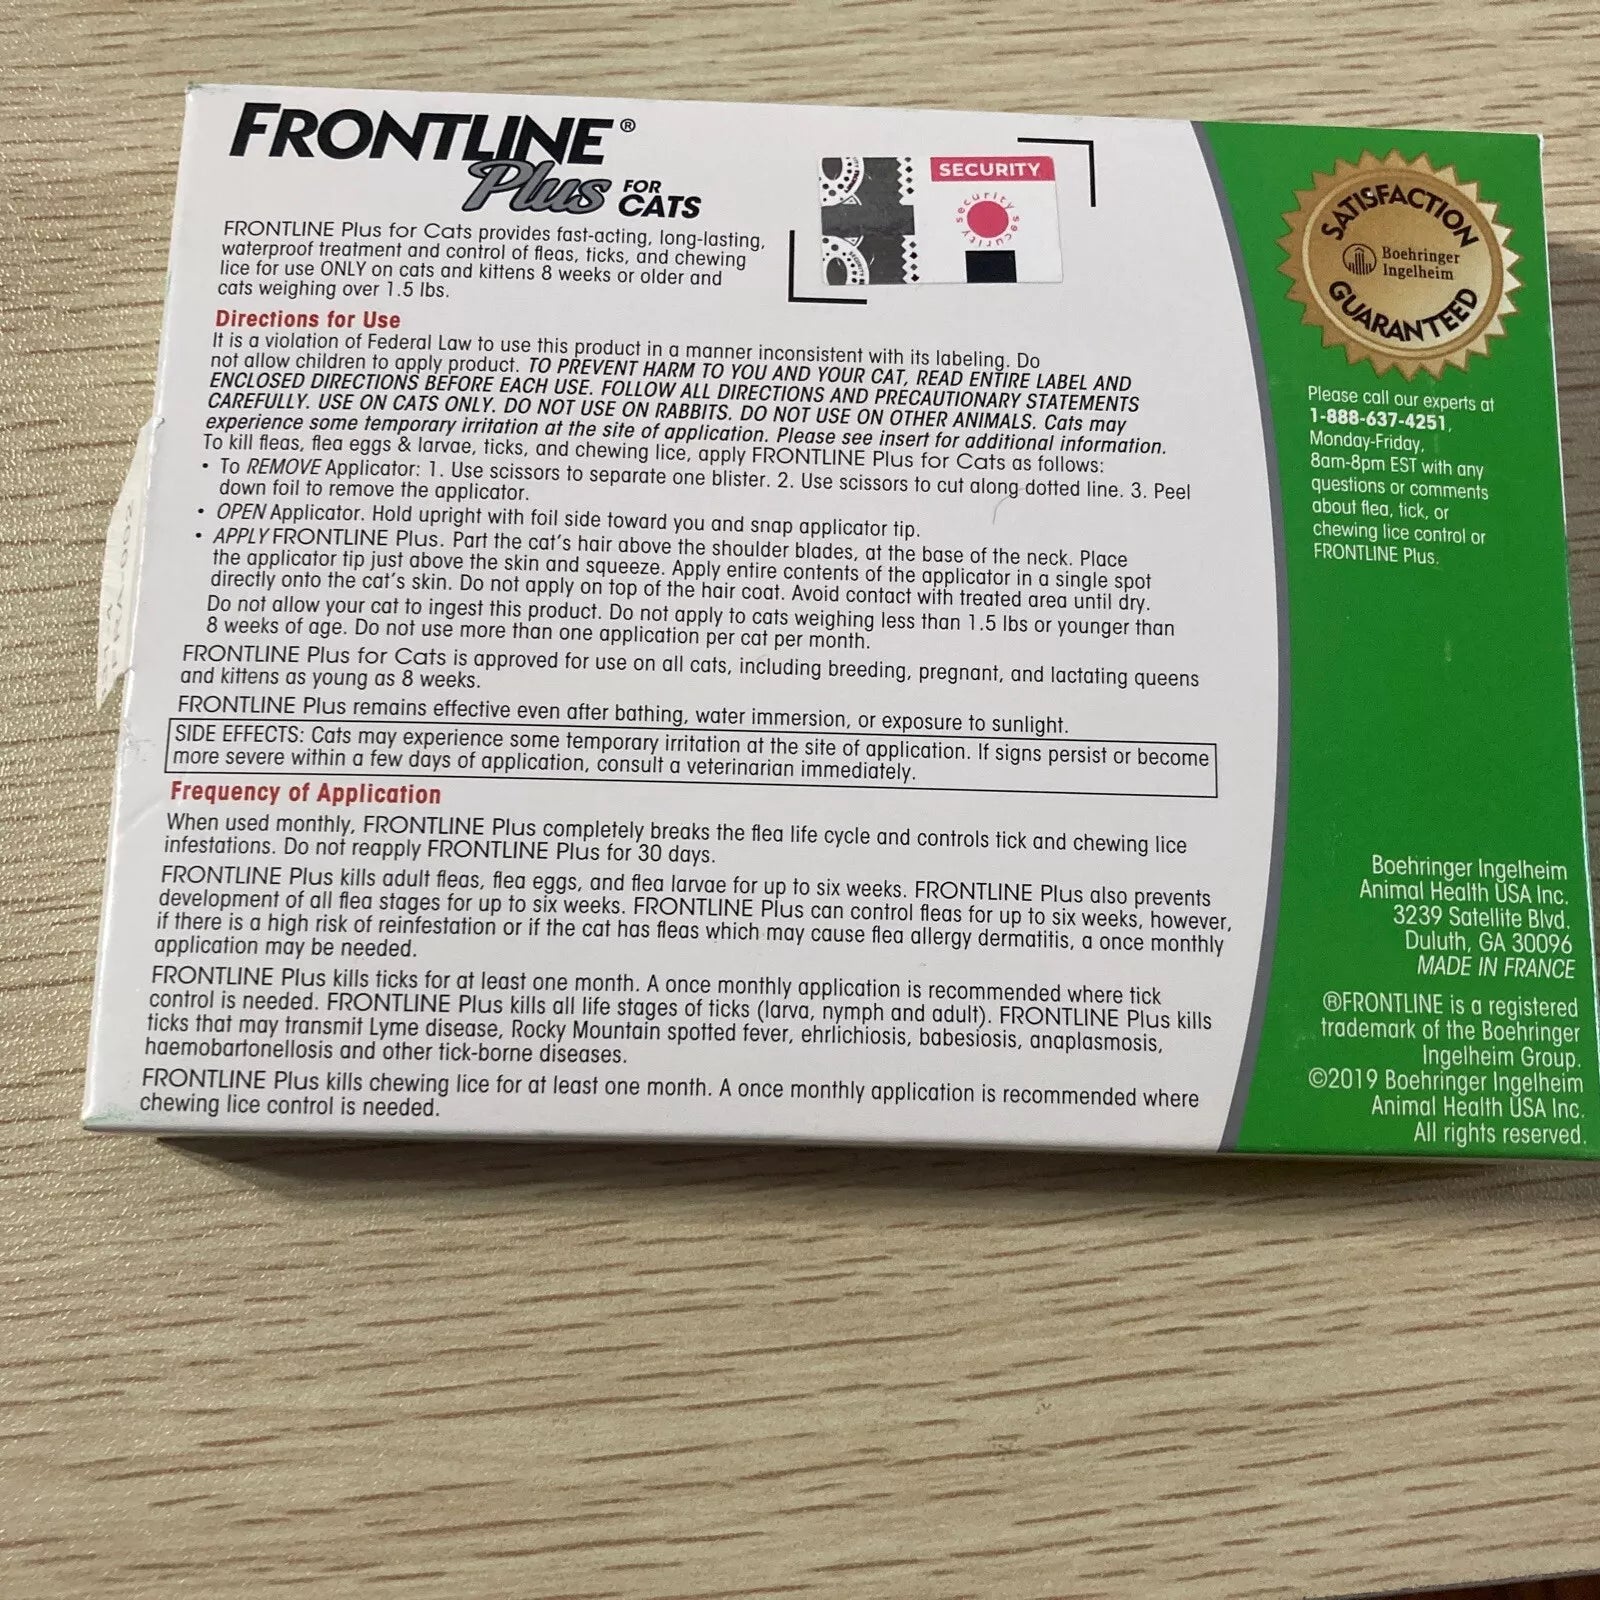 Protect Your Feline Friend: FRONTLINE Plus Flea & Tick Treatment for Cats and Kittens